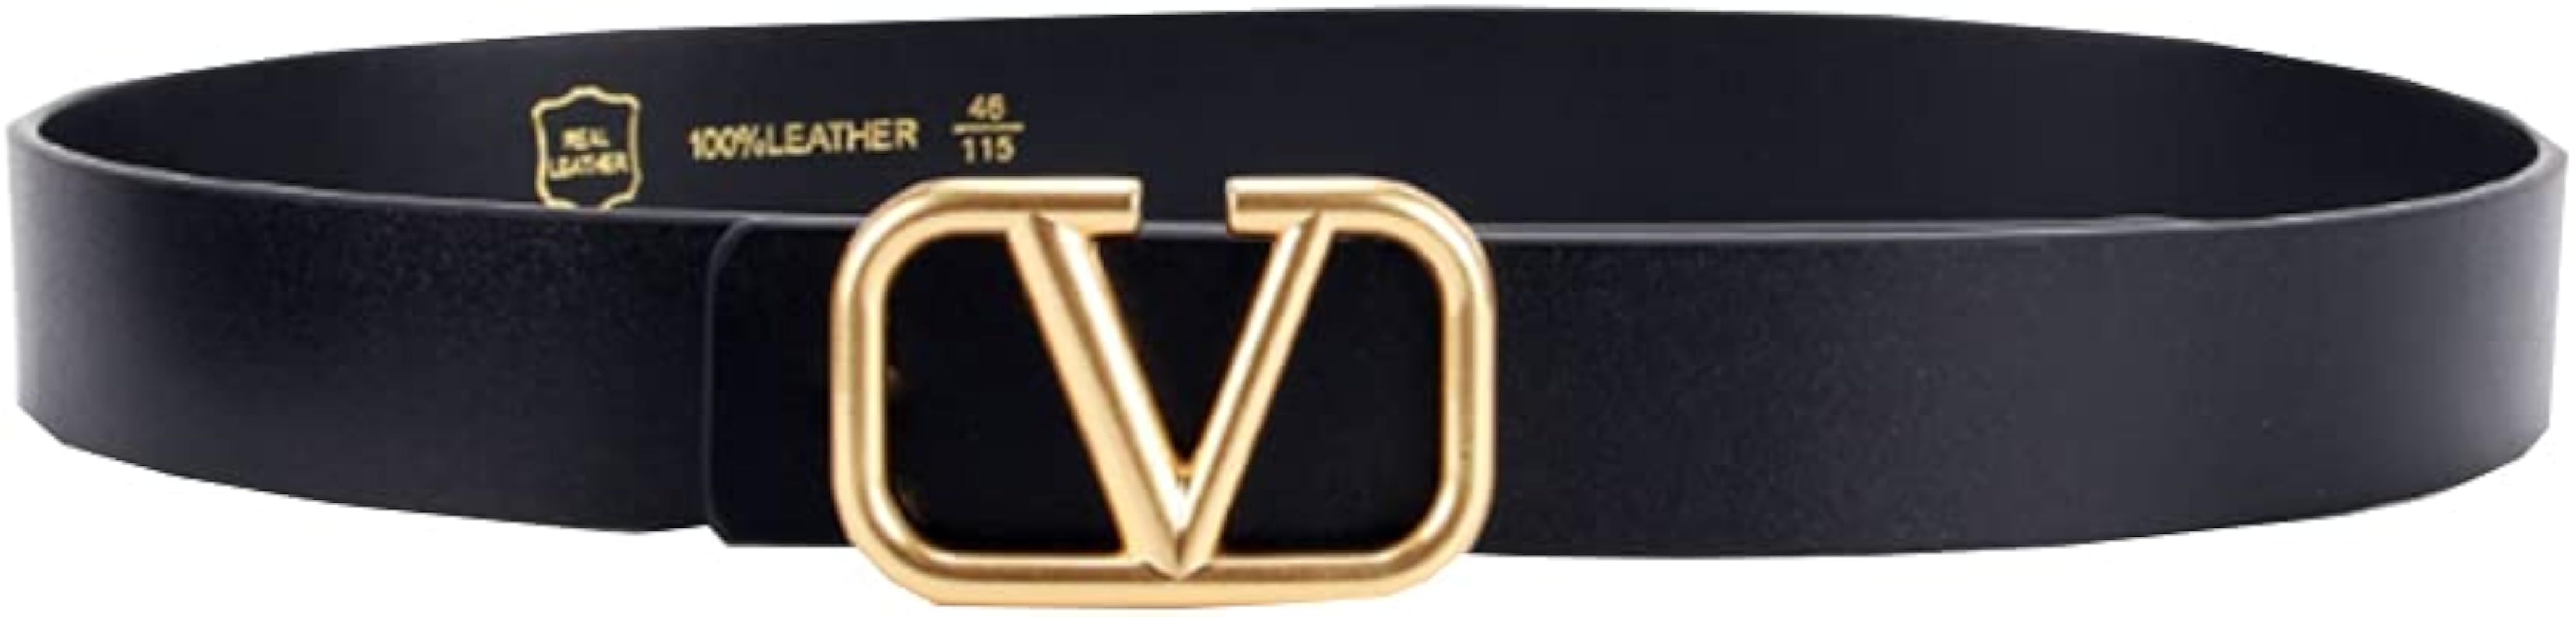 Letter V Leather Belt Metal Belt Pin Buckle Unisex Thickened 4CM / 105CM for Men and Women Universal | Amazon (US)